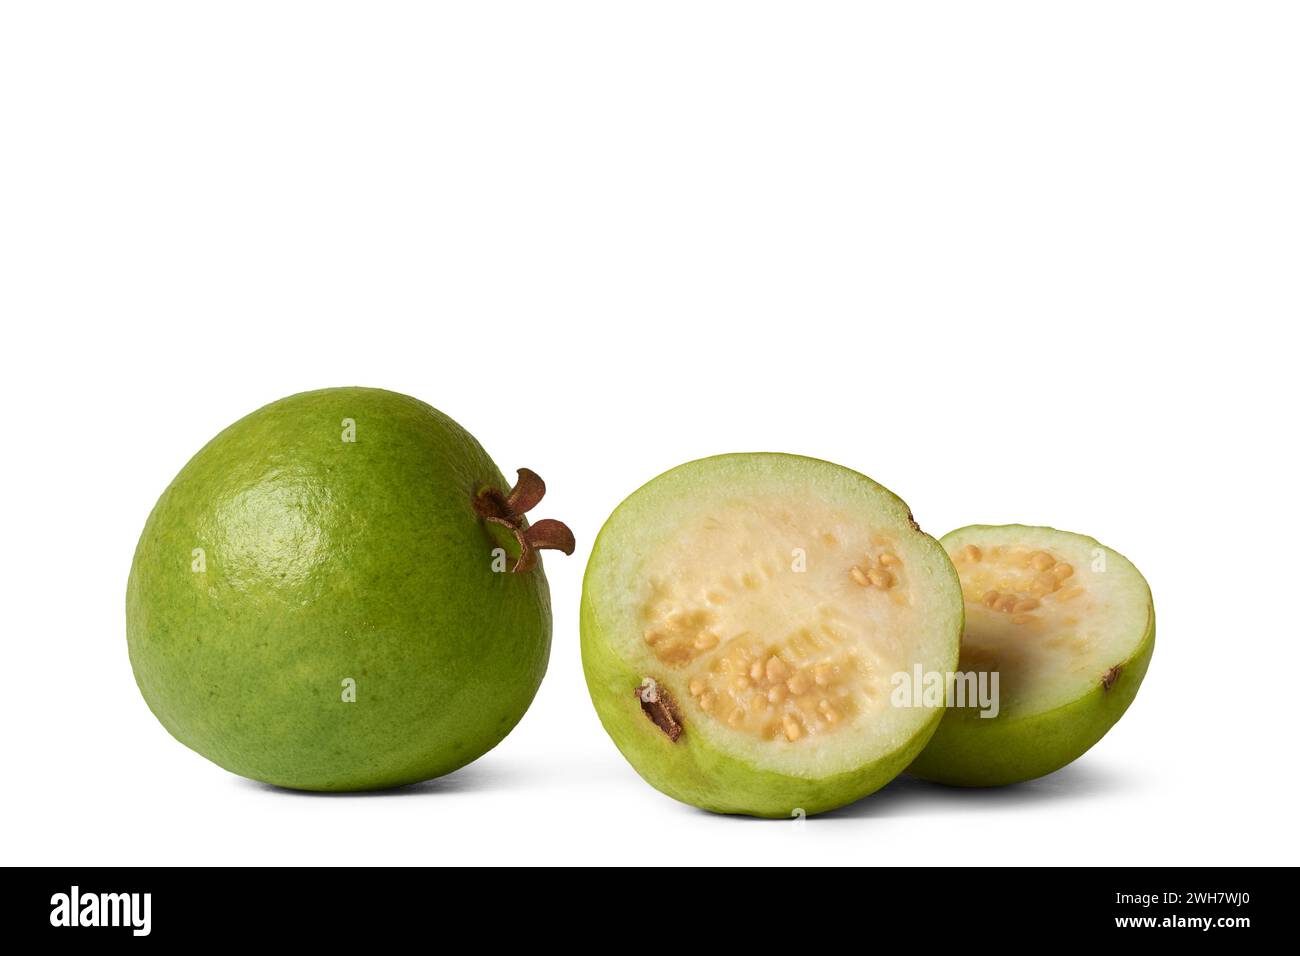 guava isolated on white background, oval shaped common tropical and nutrient-rich fruit that is high in vitamin c, fiber and antioxidants, cutout Stock Photo